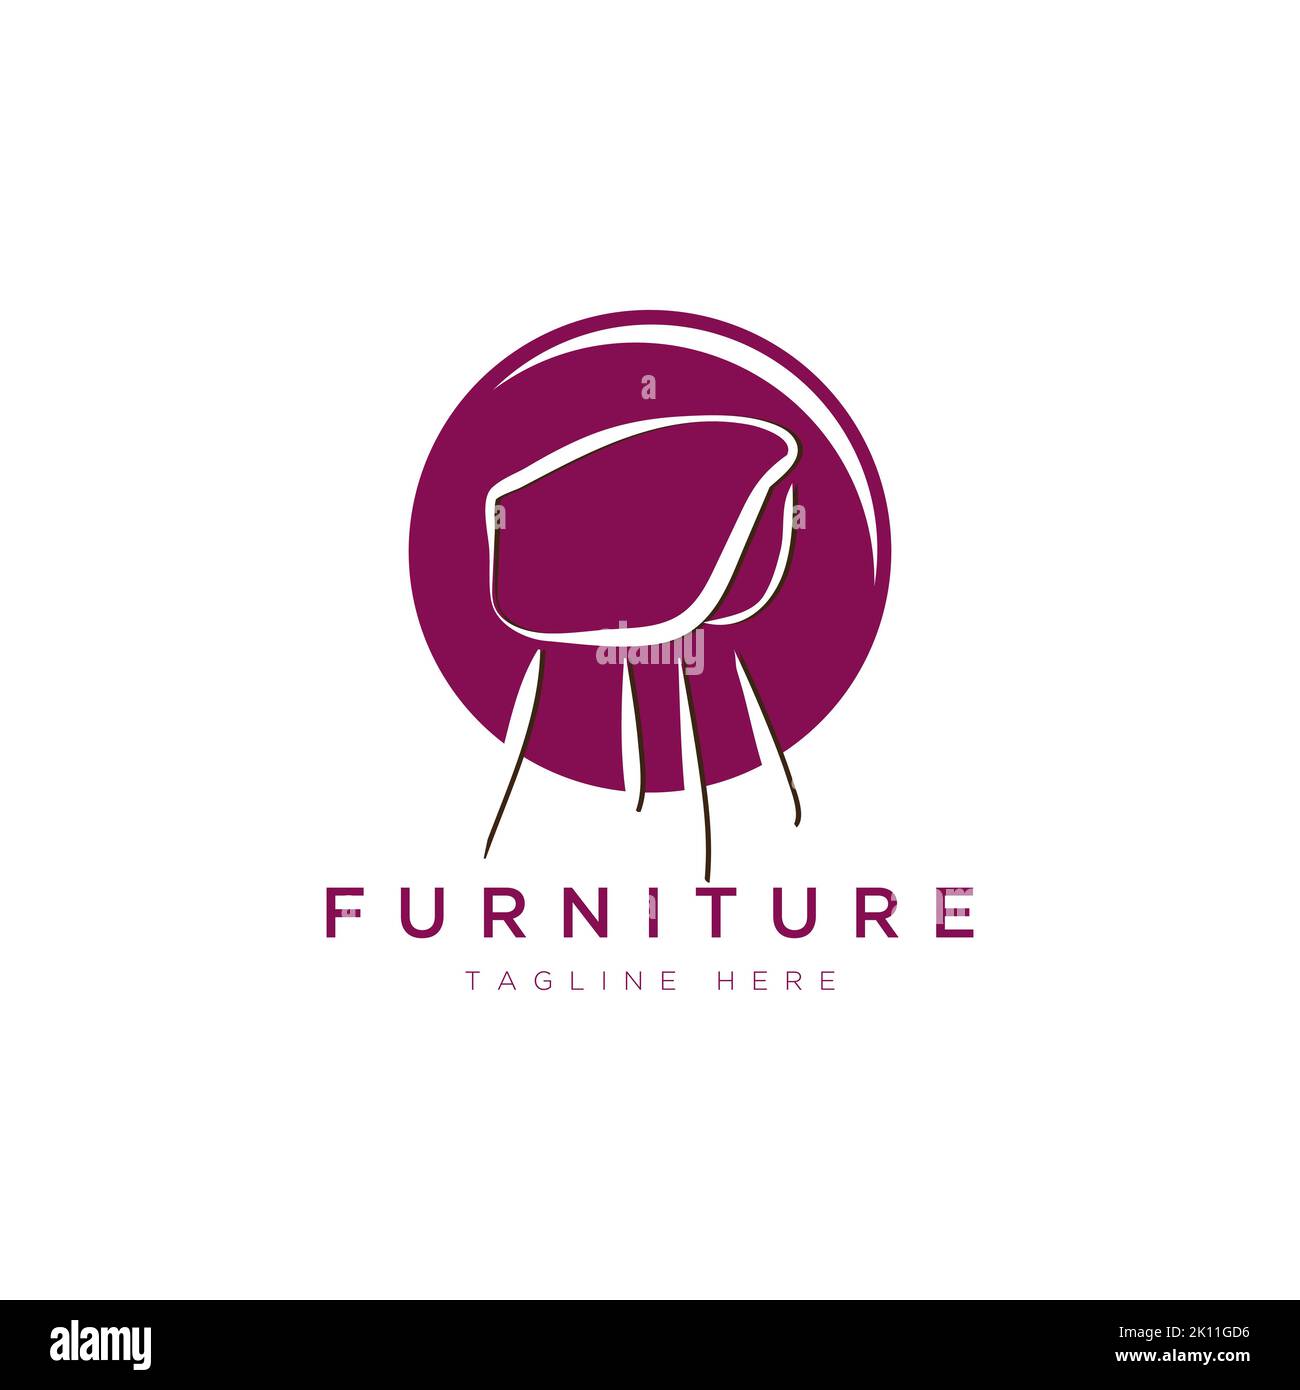 furniture logo design. Symbol and icon of chairs, sofas, tables, and home furnishings Stock Vector